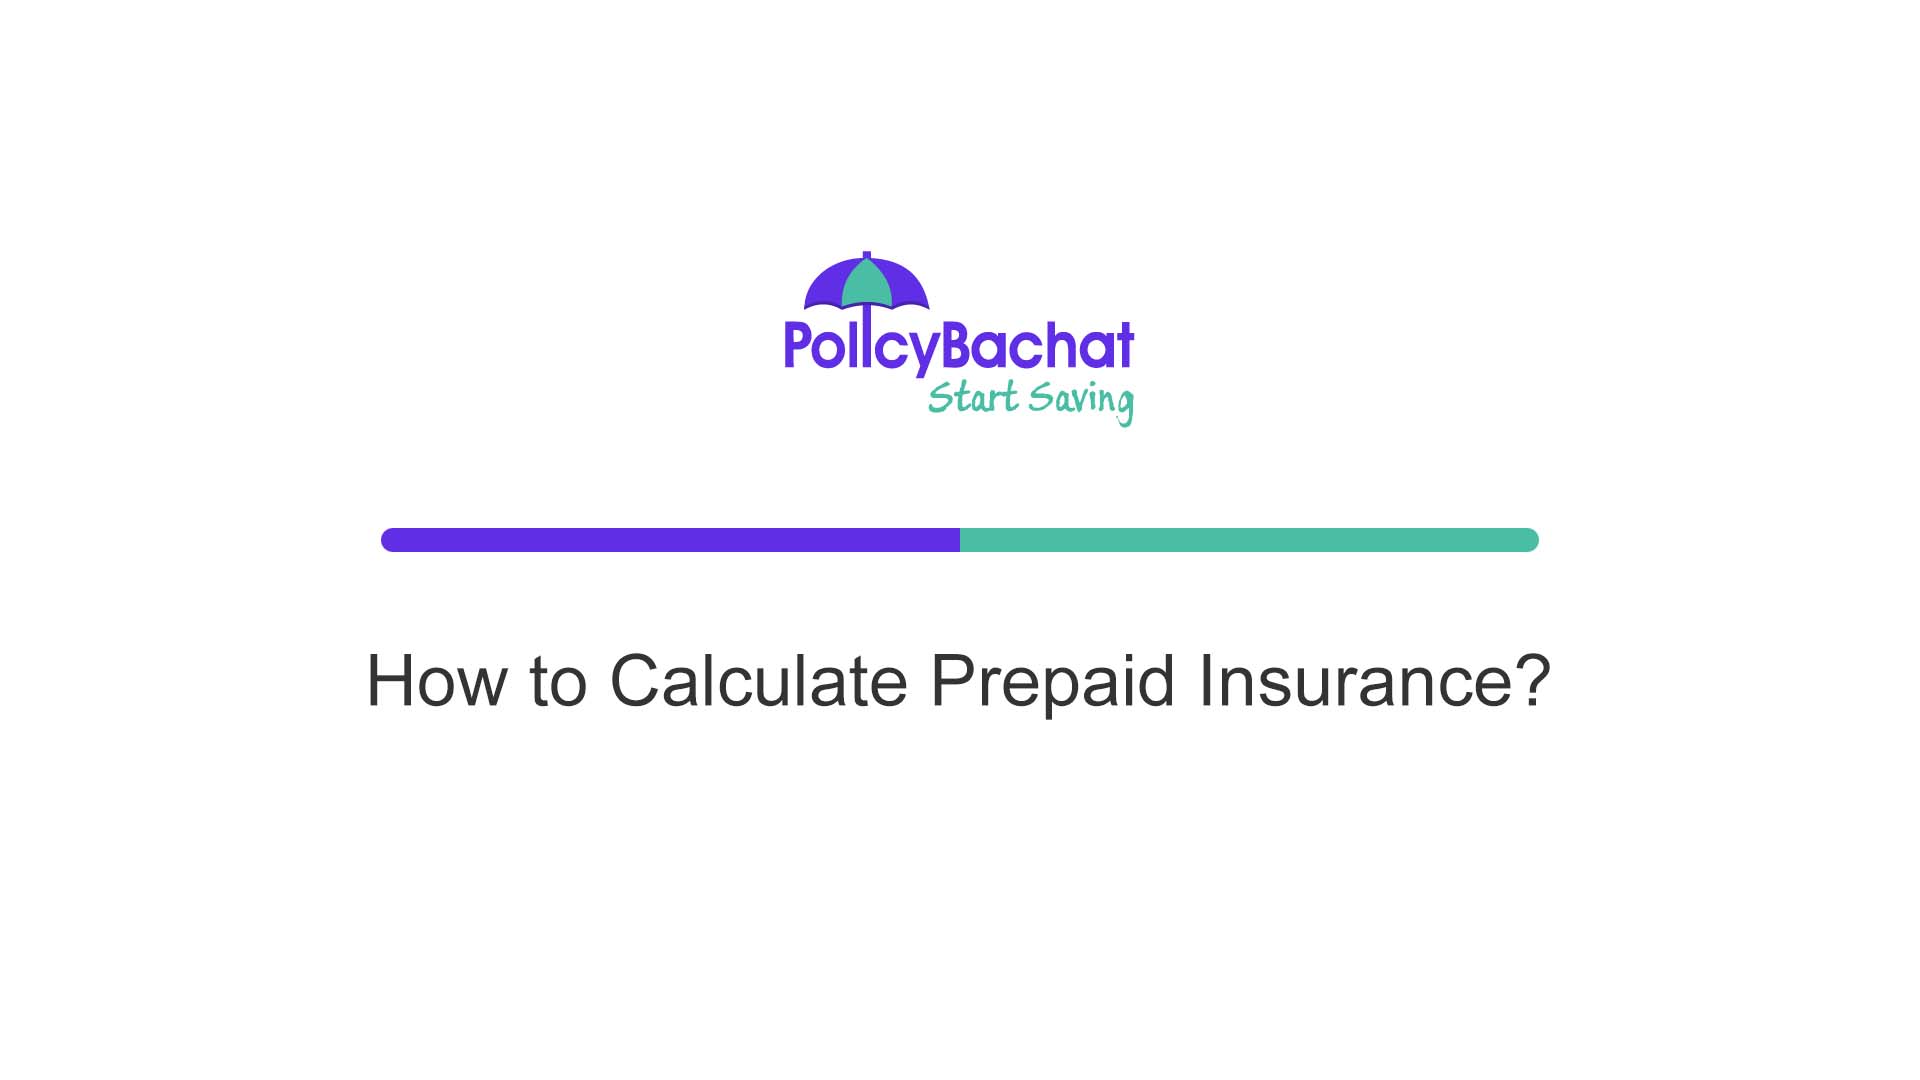 How To Calculate Prepaid Insurance Policybachat 3169